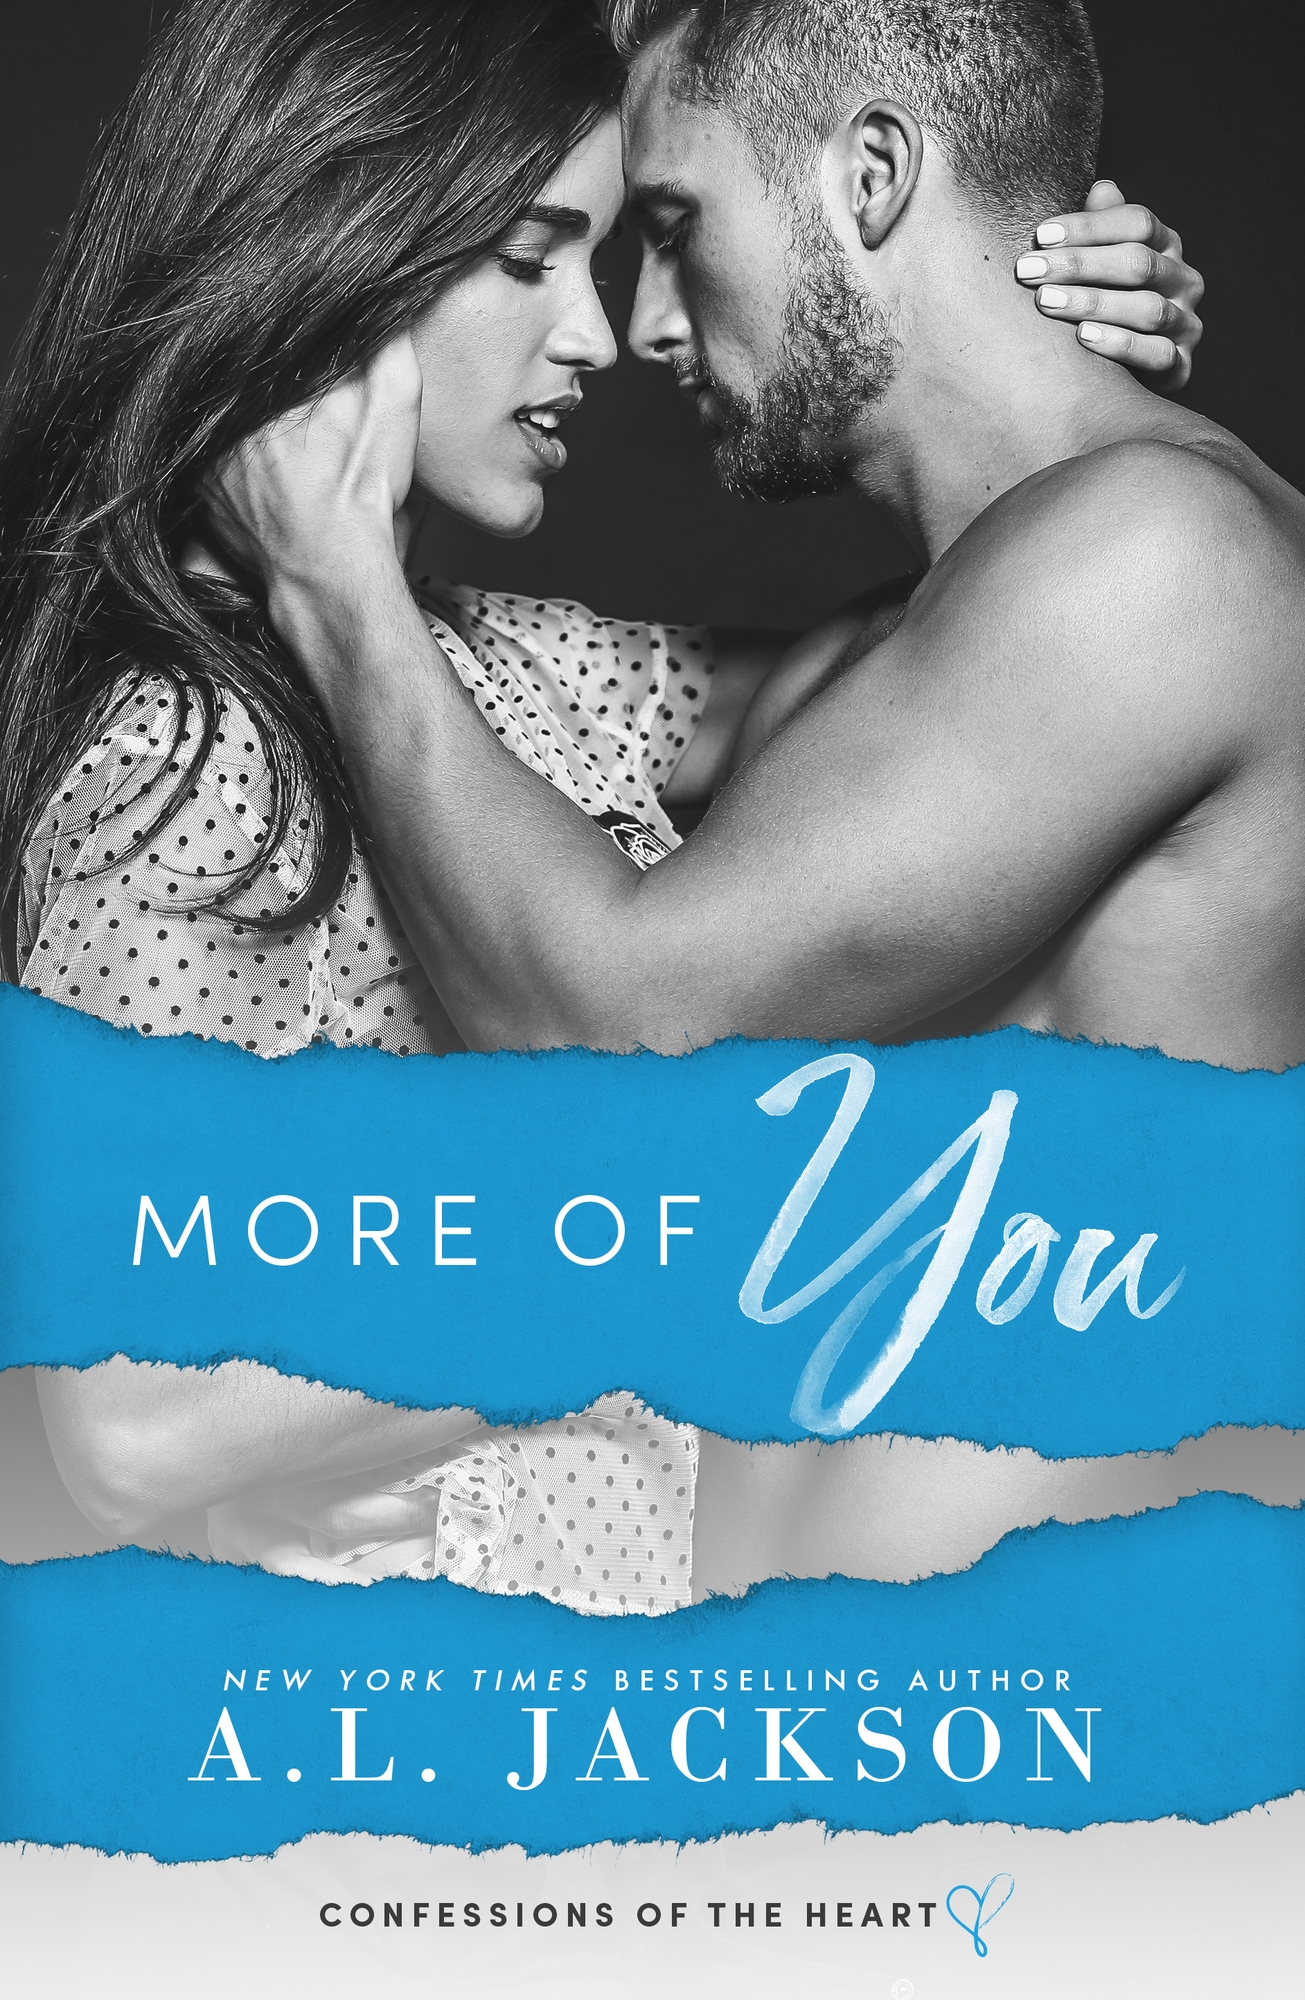 More Of You by A. L. Jackson [Cover Reval]